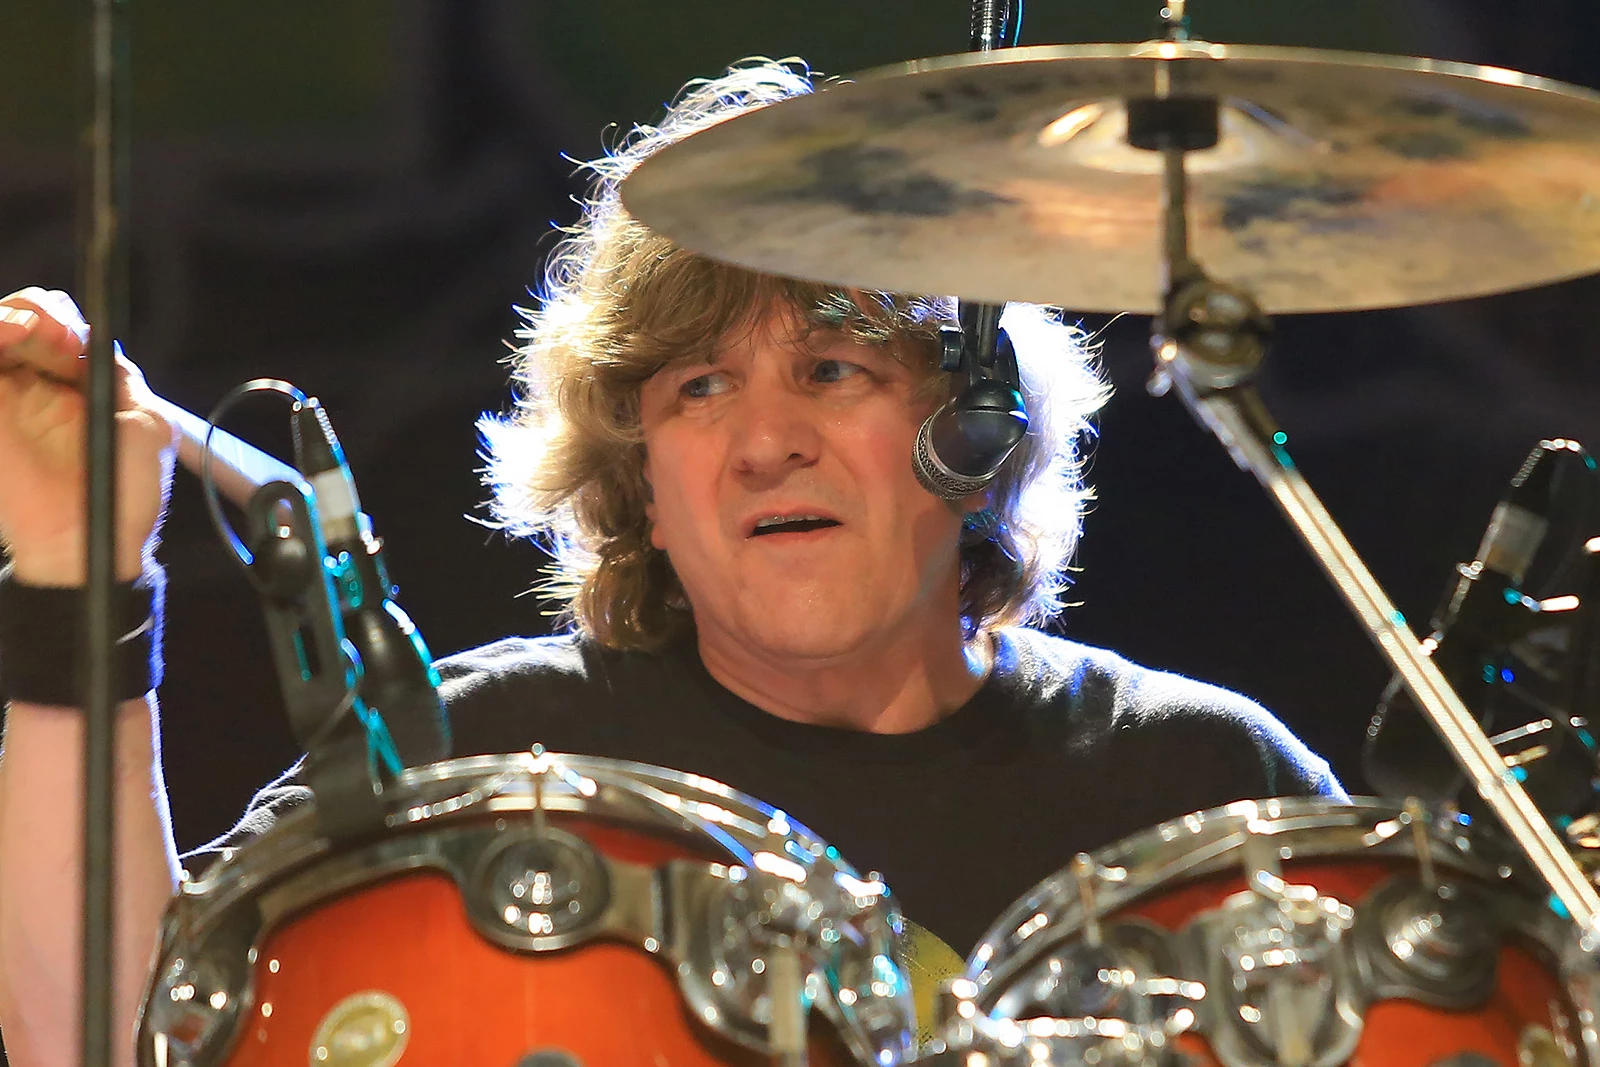 Kix Drummer Jimmy Chalfant Collapsed On Stage in Cardiac Event